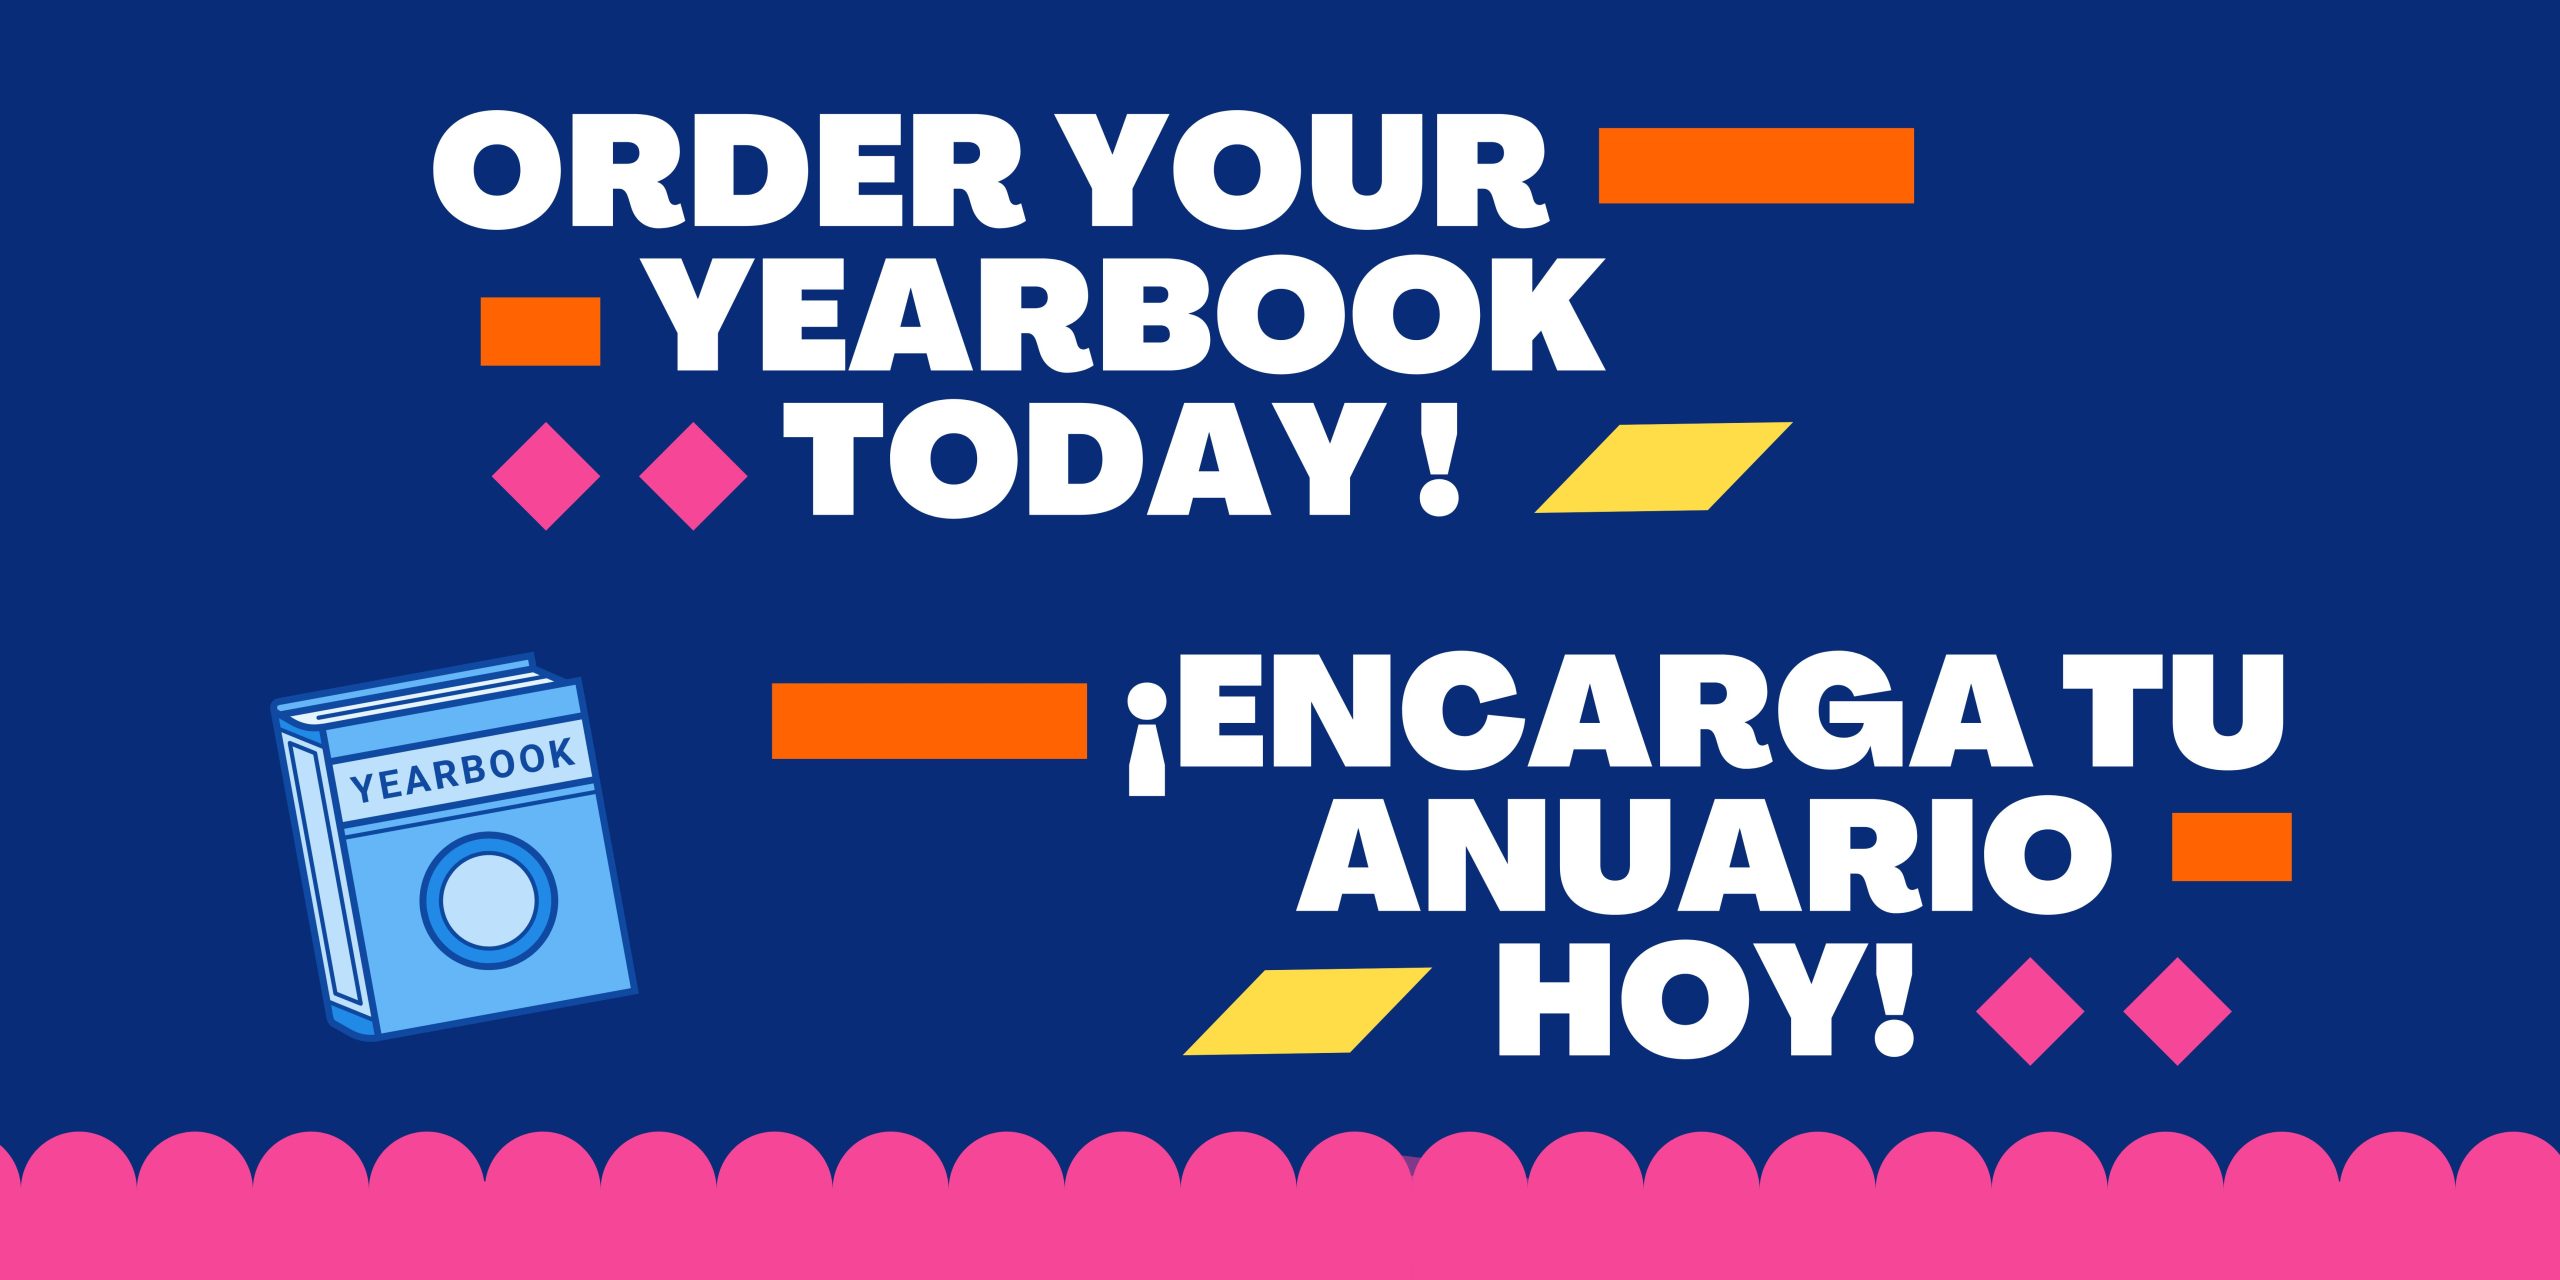 Dark blue background with pink scalloped border along the bottom. Graphic of a blue yearbook is on left. White text, "Order Your Yearbook Today! ¡Encarga Tu Anuario Hoy!"